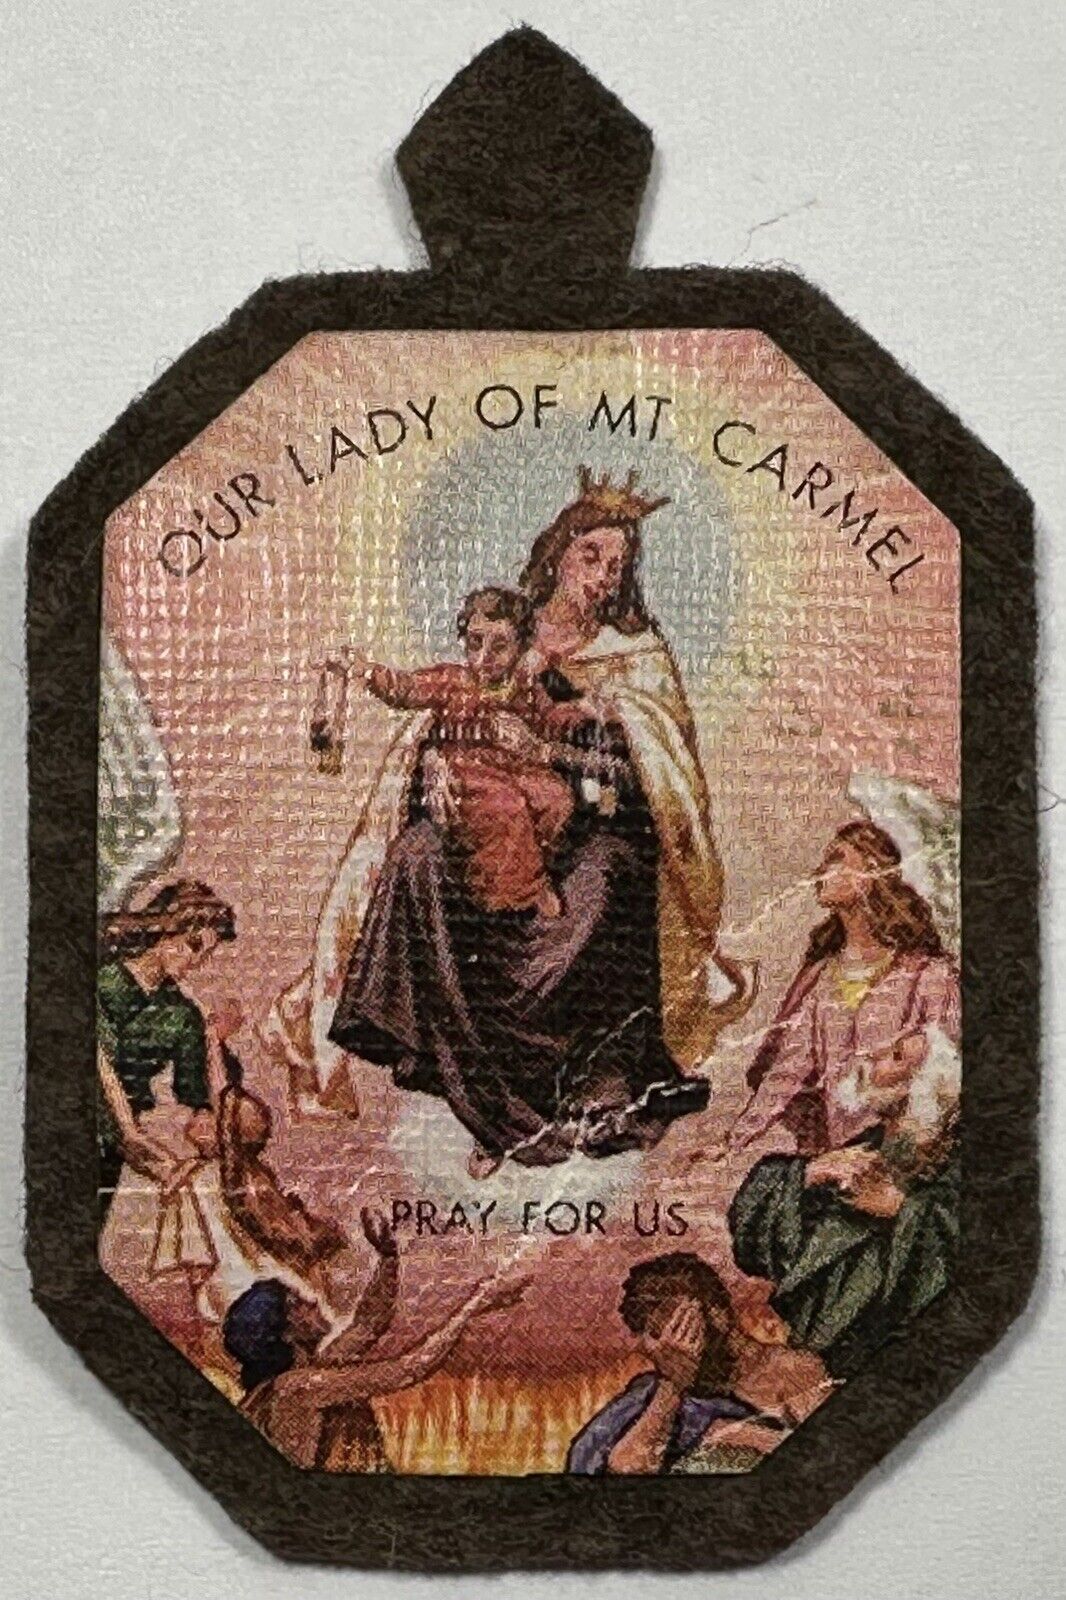 Our Lady of Mt. Carmel Pray for Us, Vintage Holy Devotional Badge.